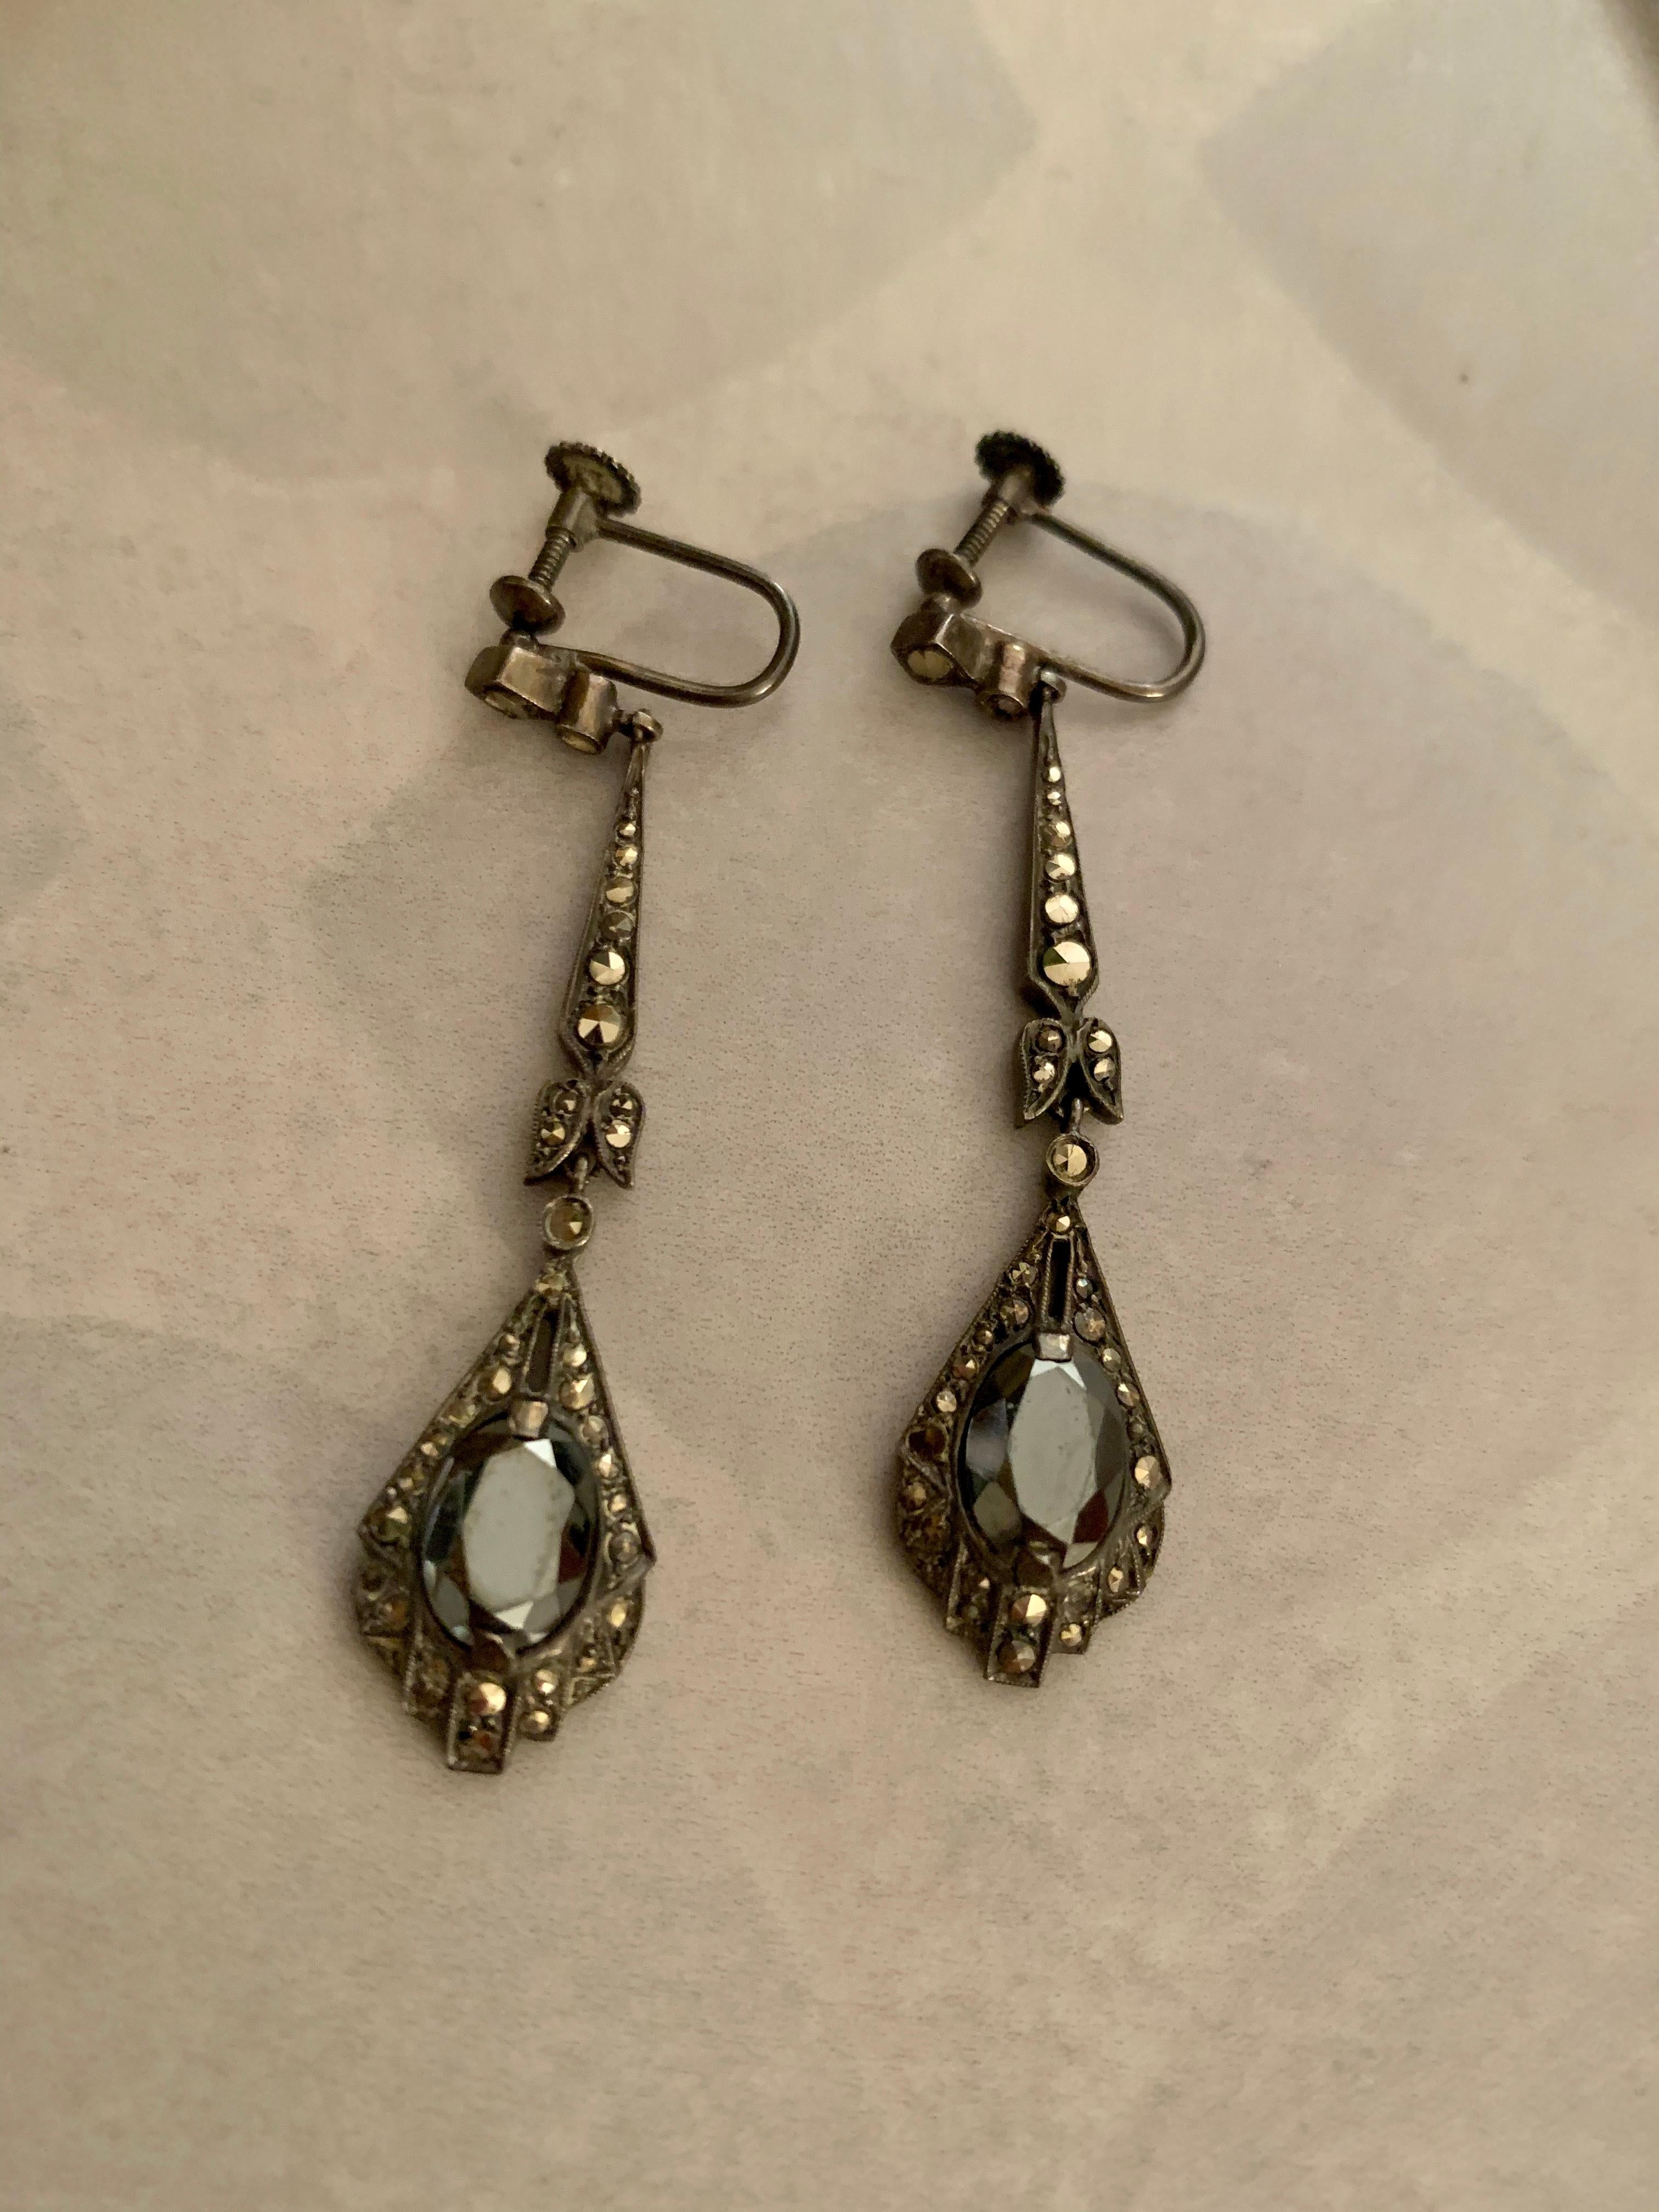 These lovely vintage earrings feature a drop which is a faceted Hematite stone, surrounded by Marcasite accents.  The Marcasite extends up to the closure, which is a screw back. 

Measurement:  12 x 52mm
Weight:  8.1 grams